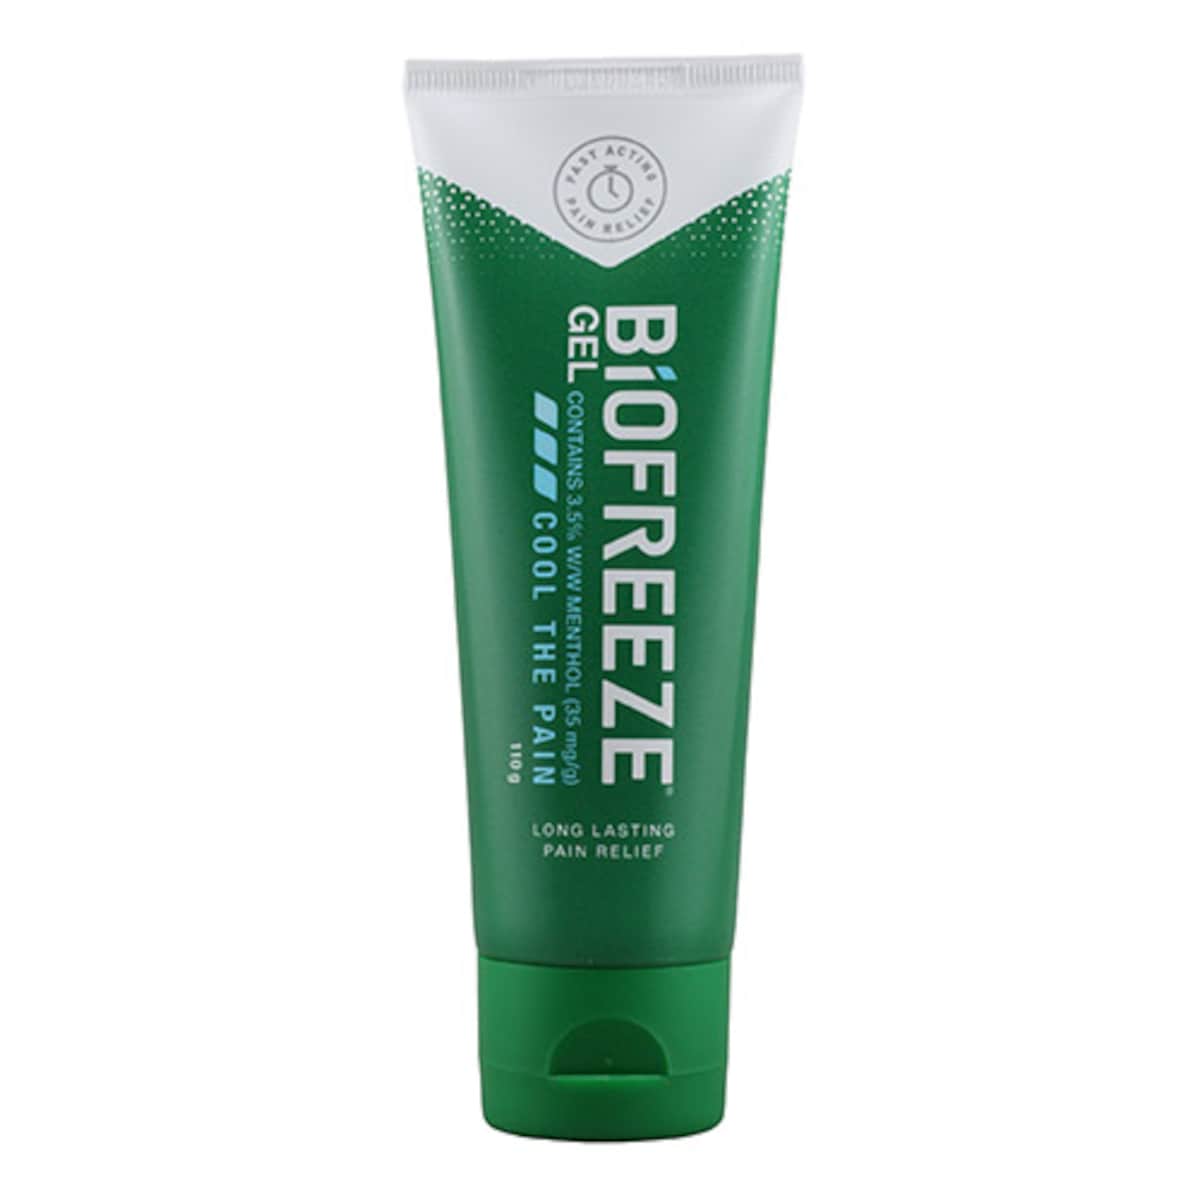 Biofreeze Pain Relieving Gel Tube 110g